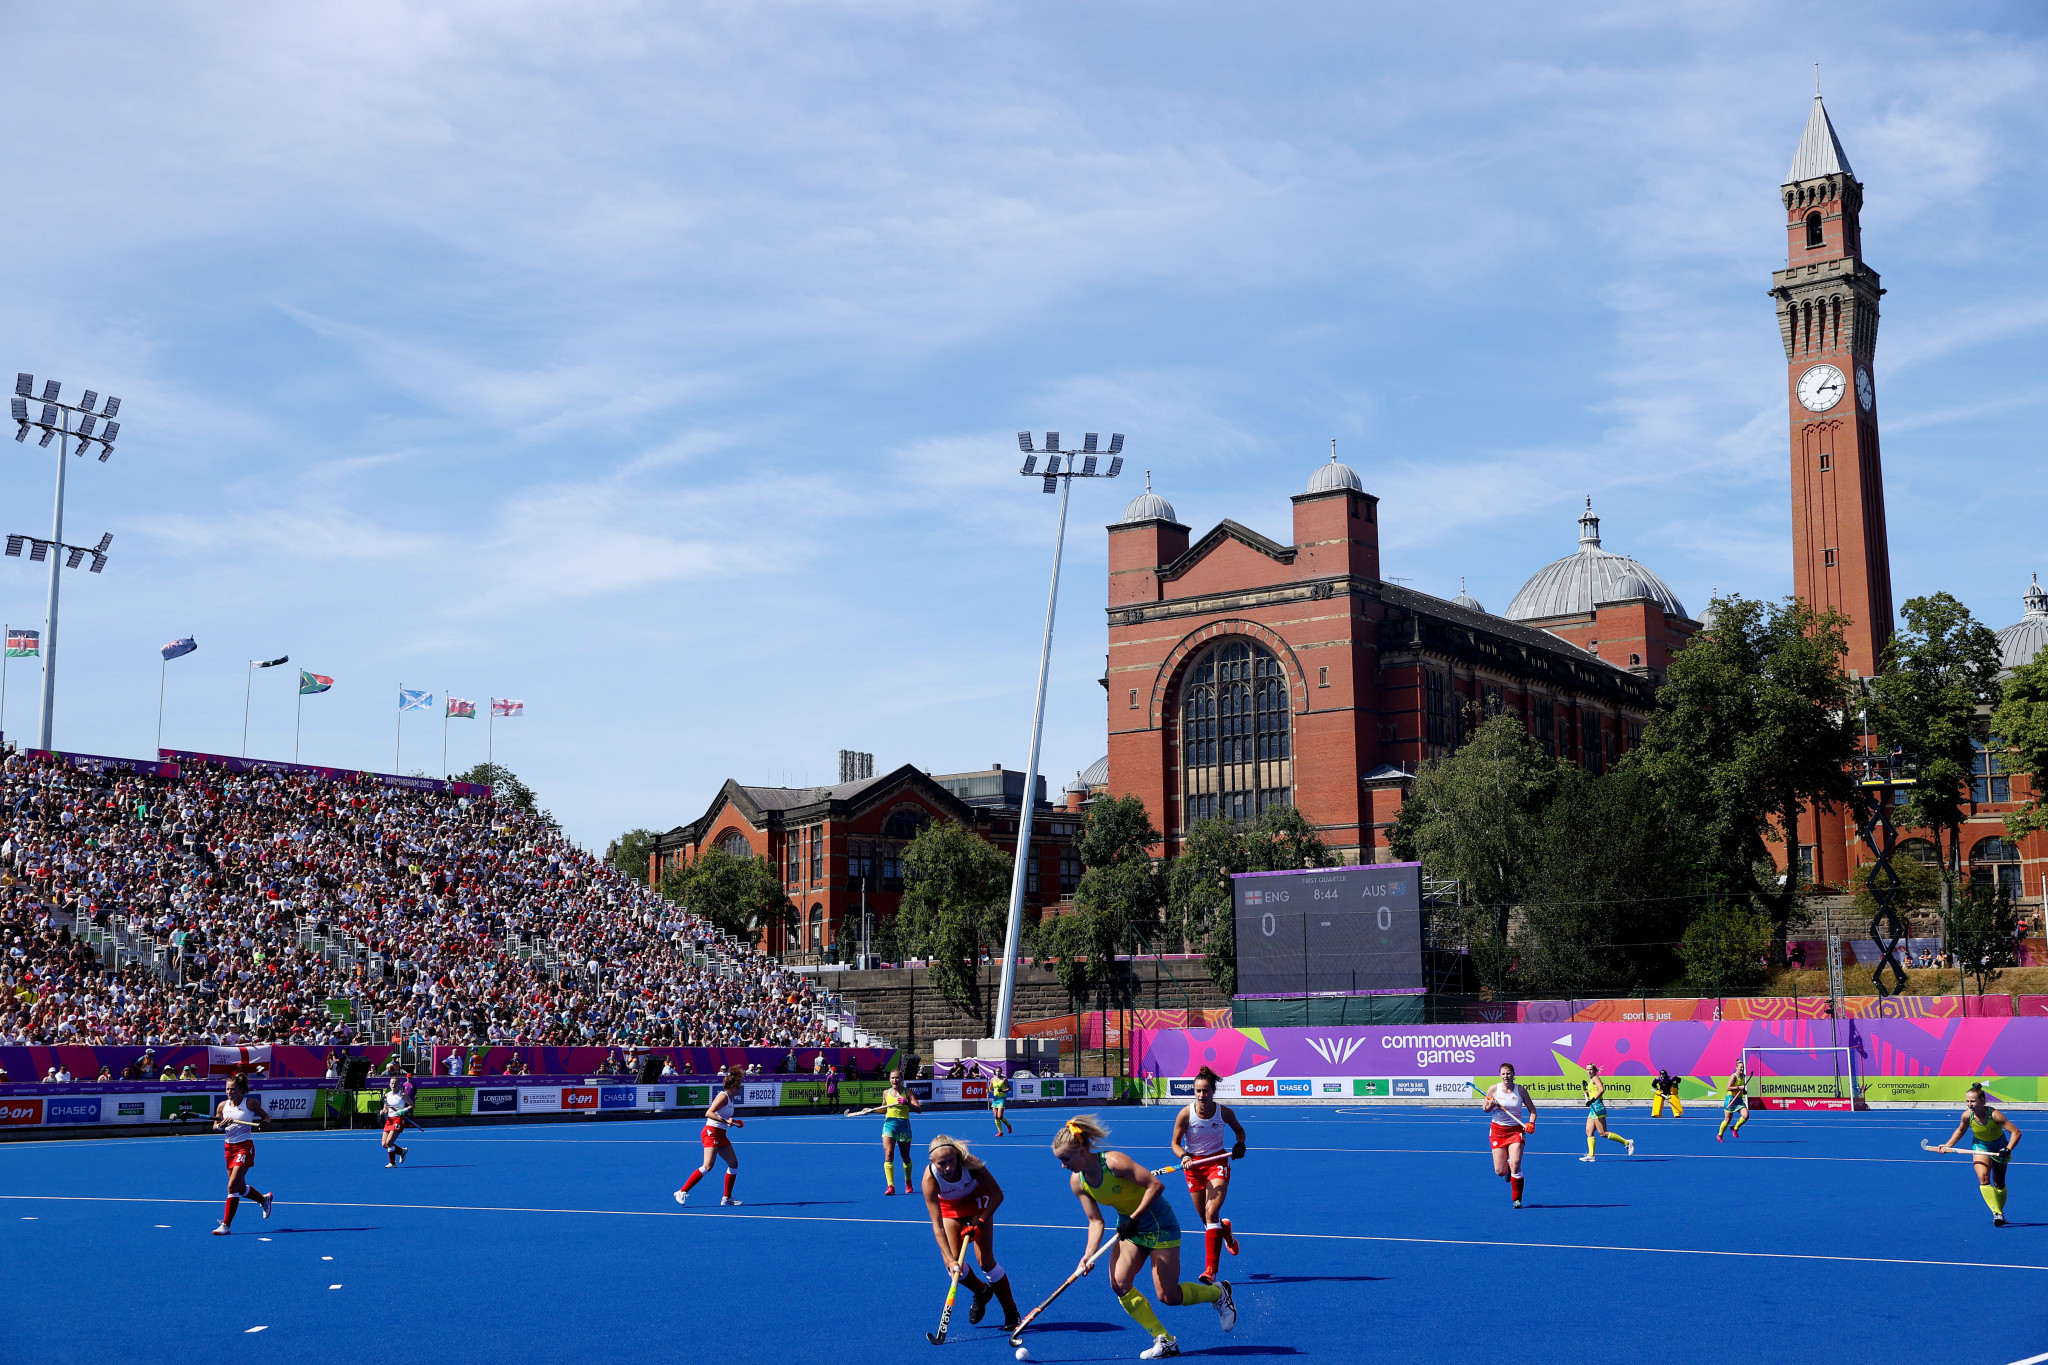 England won a first Commonwealth Games hockey gold medal with victory over Australia at Birmingham 2022 ©Getty Images